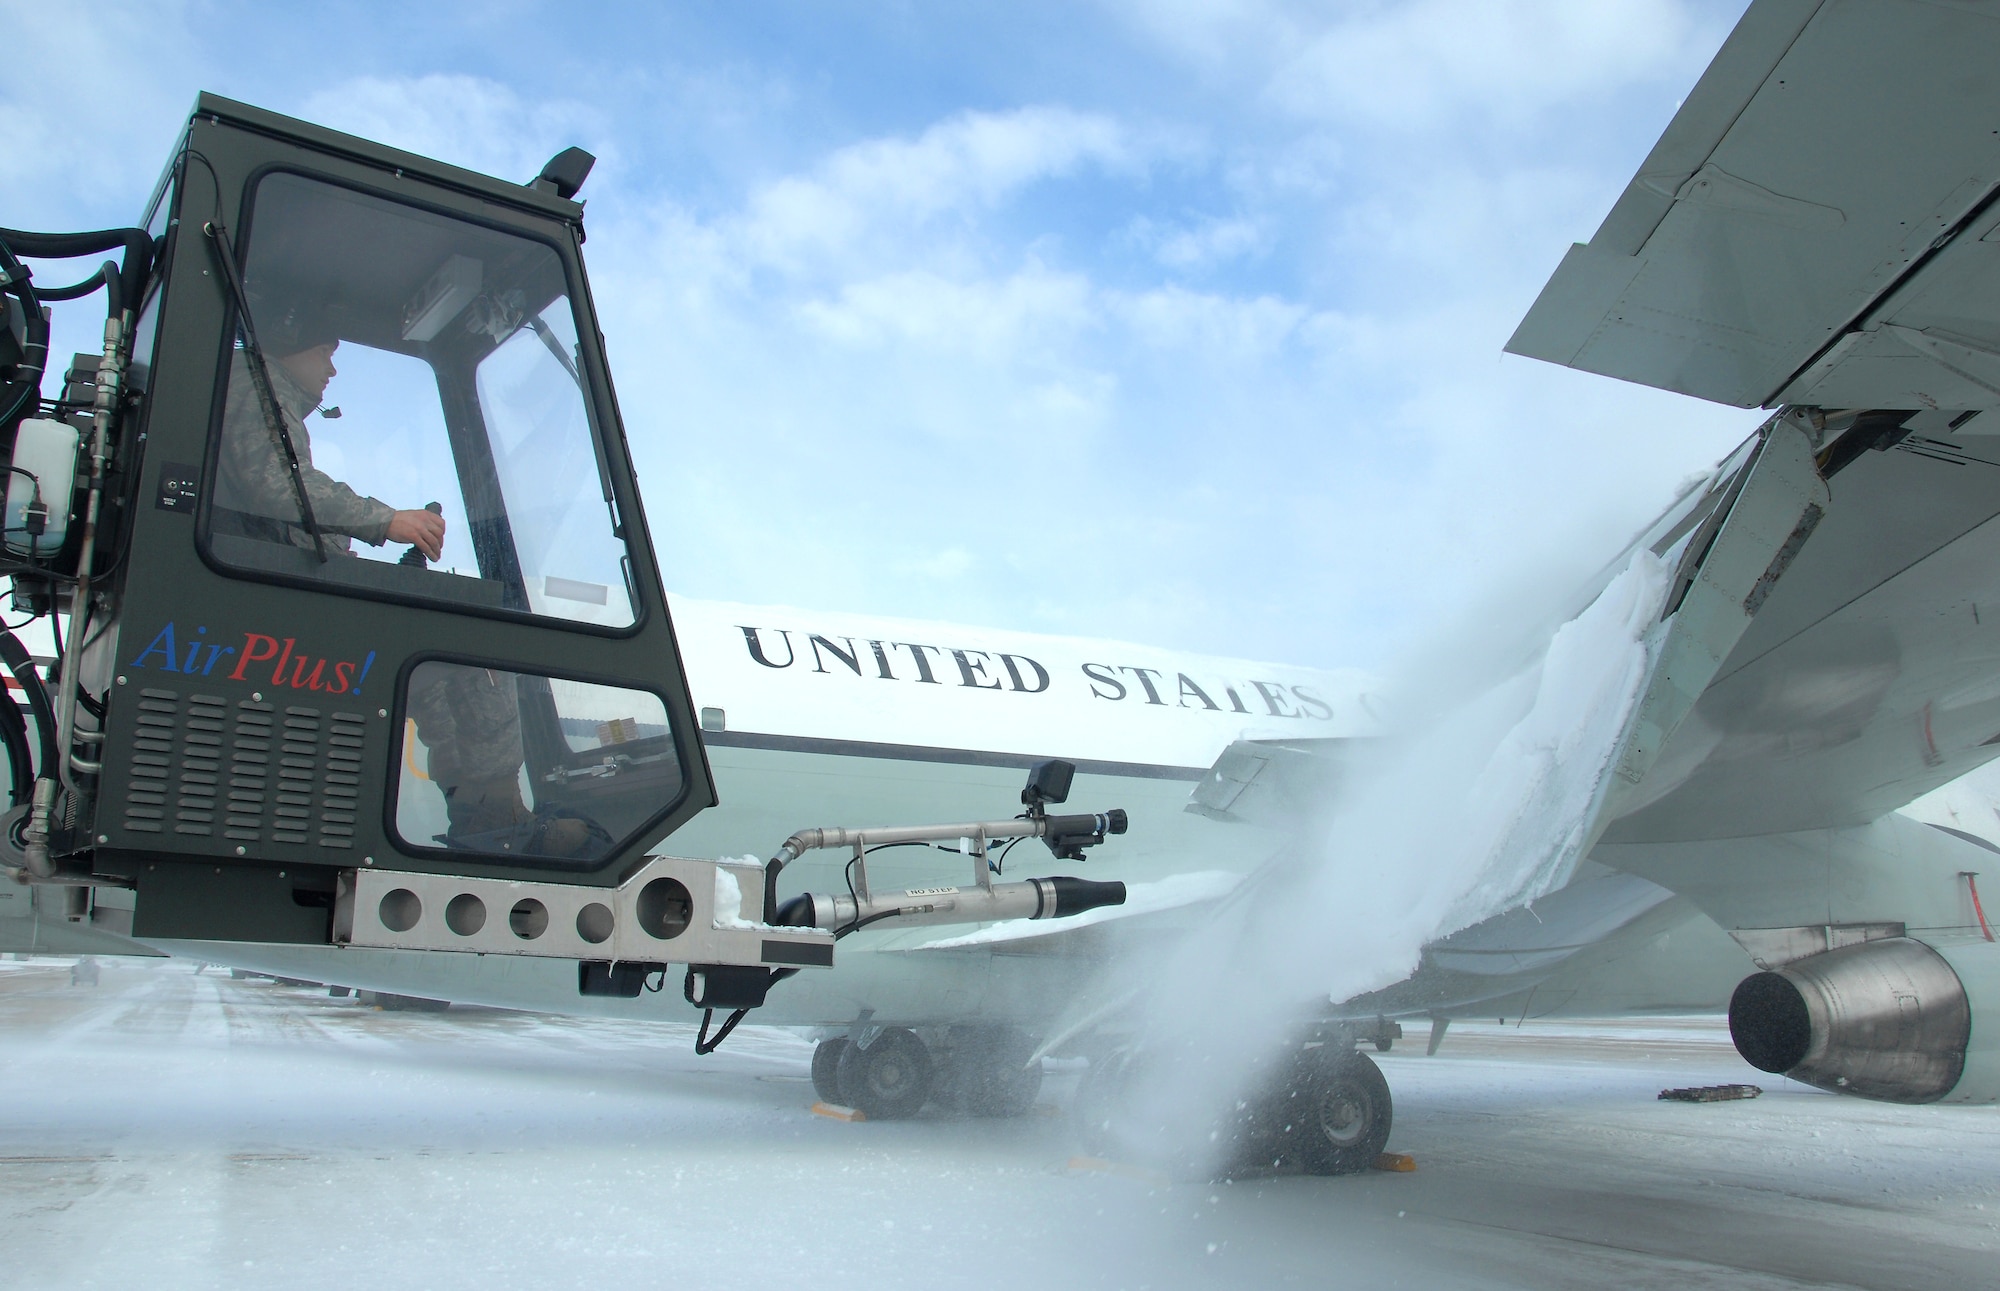 U.S. Air Force Senior Airman Kyle Kindig operates an air cannon from a deicing truck to blow snow off the wing of an OC-135 Open Skies aircraft Feb. 3 at Offutt Air Force Base Neb. Additional maintenance time is typically needed during winter operations to heat the aircraft and to remove snow and ice. Kindig is a guidance and control maintenance technician assigned to the 83rd Aircraft Maintenance Unit, 55 Aircraft Maintenance Squadron. (U.S. Air Force photo by Delanie Stafford/Released)